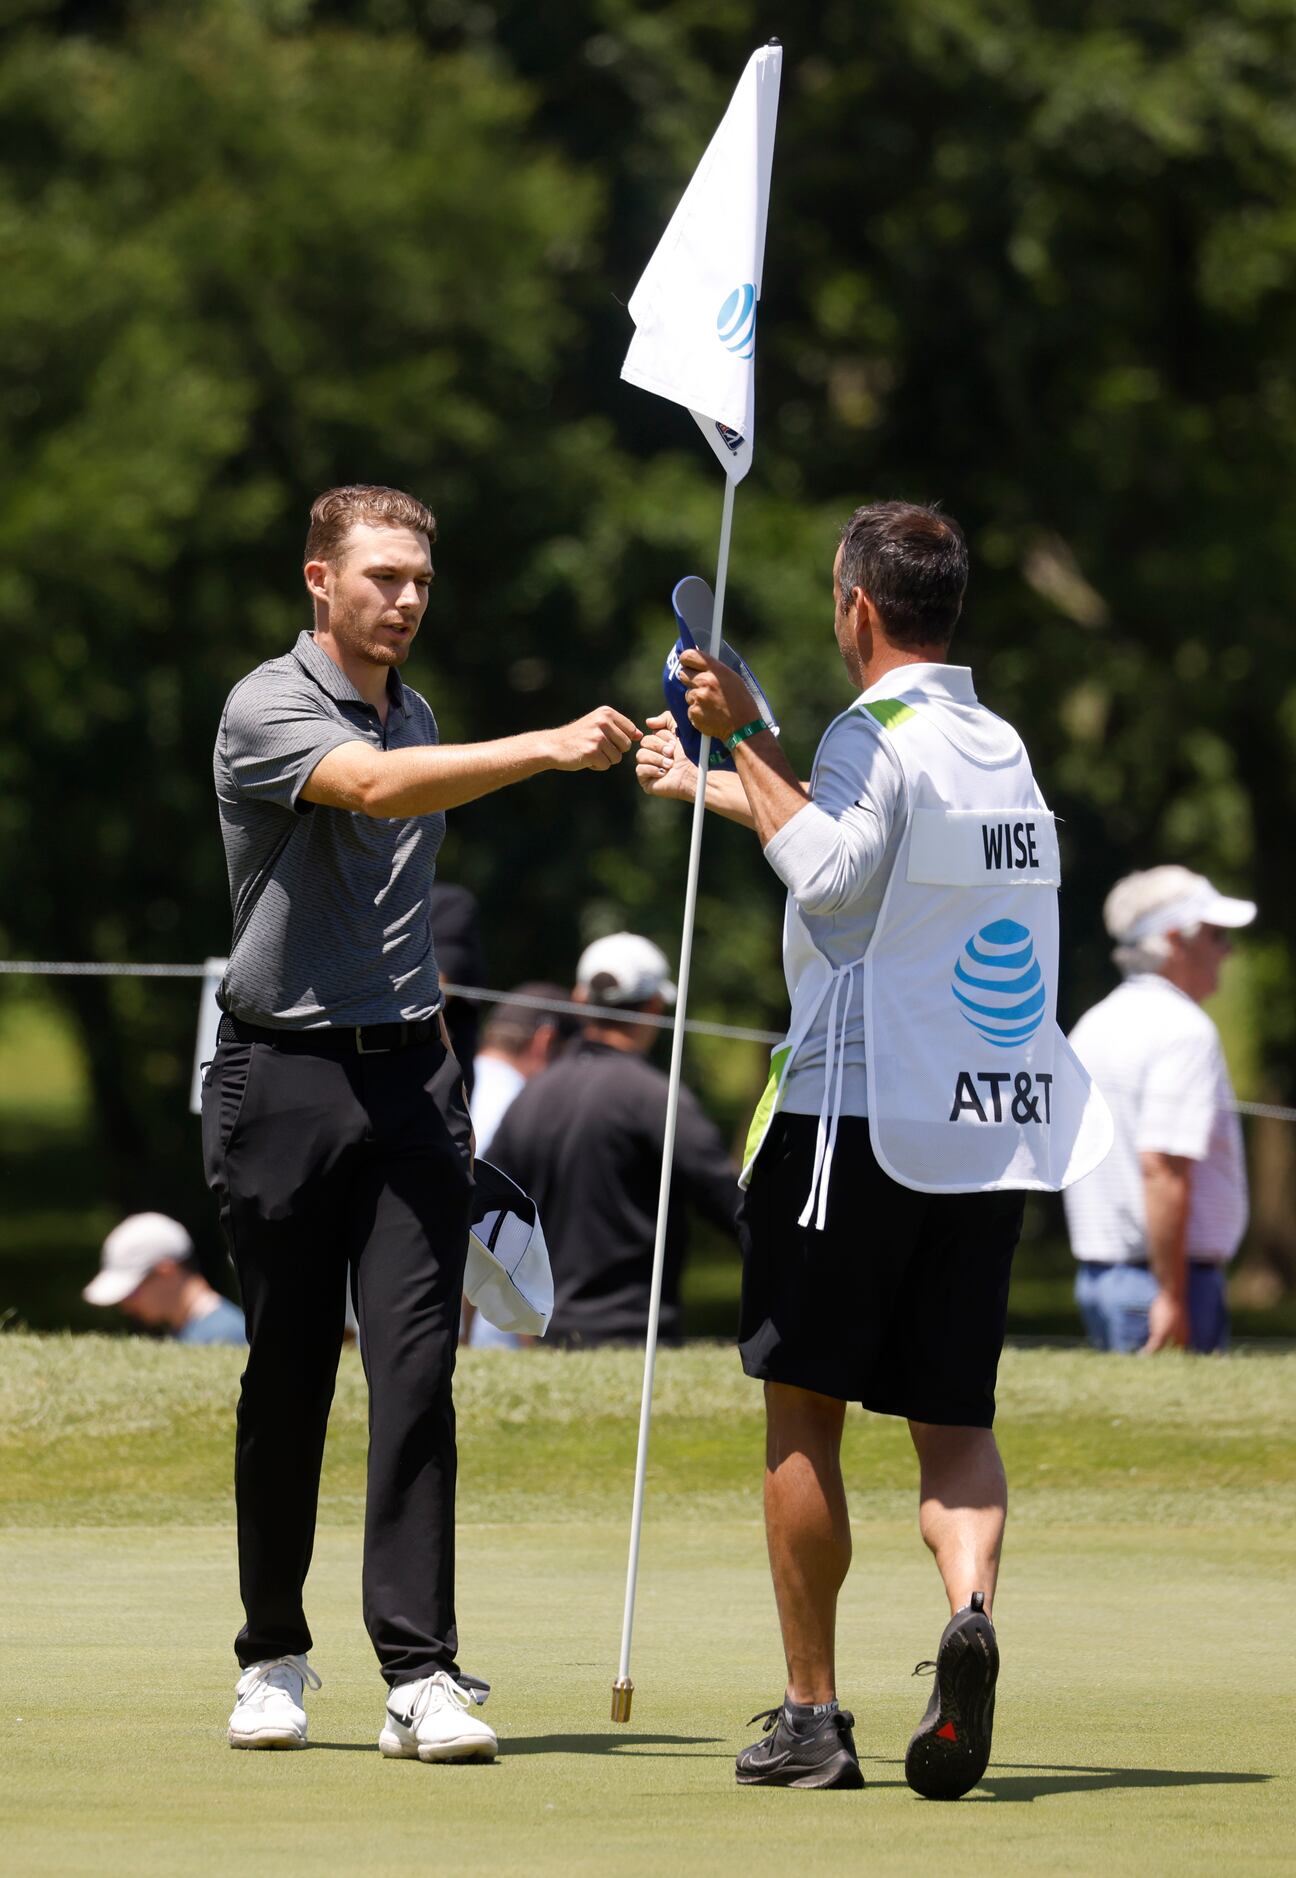 Aaron Wise bumps fists with his caddie after finishing -8 on the 18th hole during round 1 of...